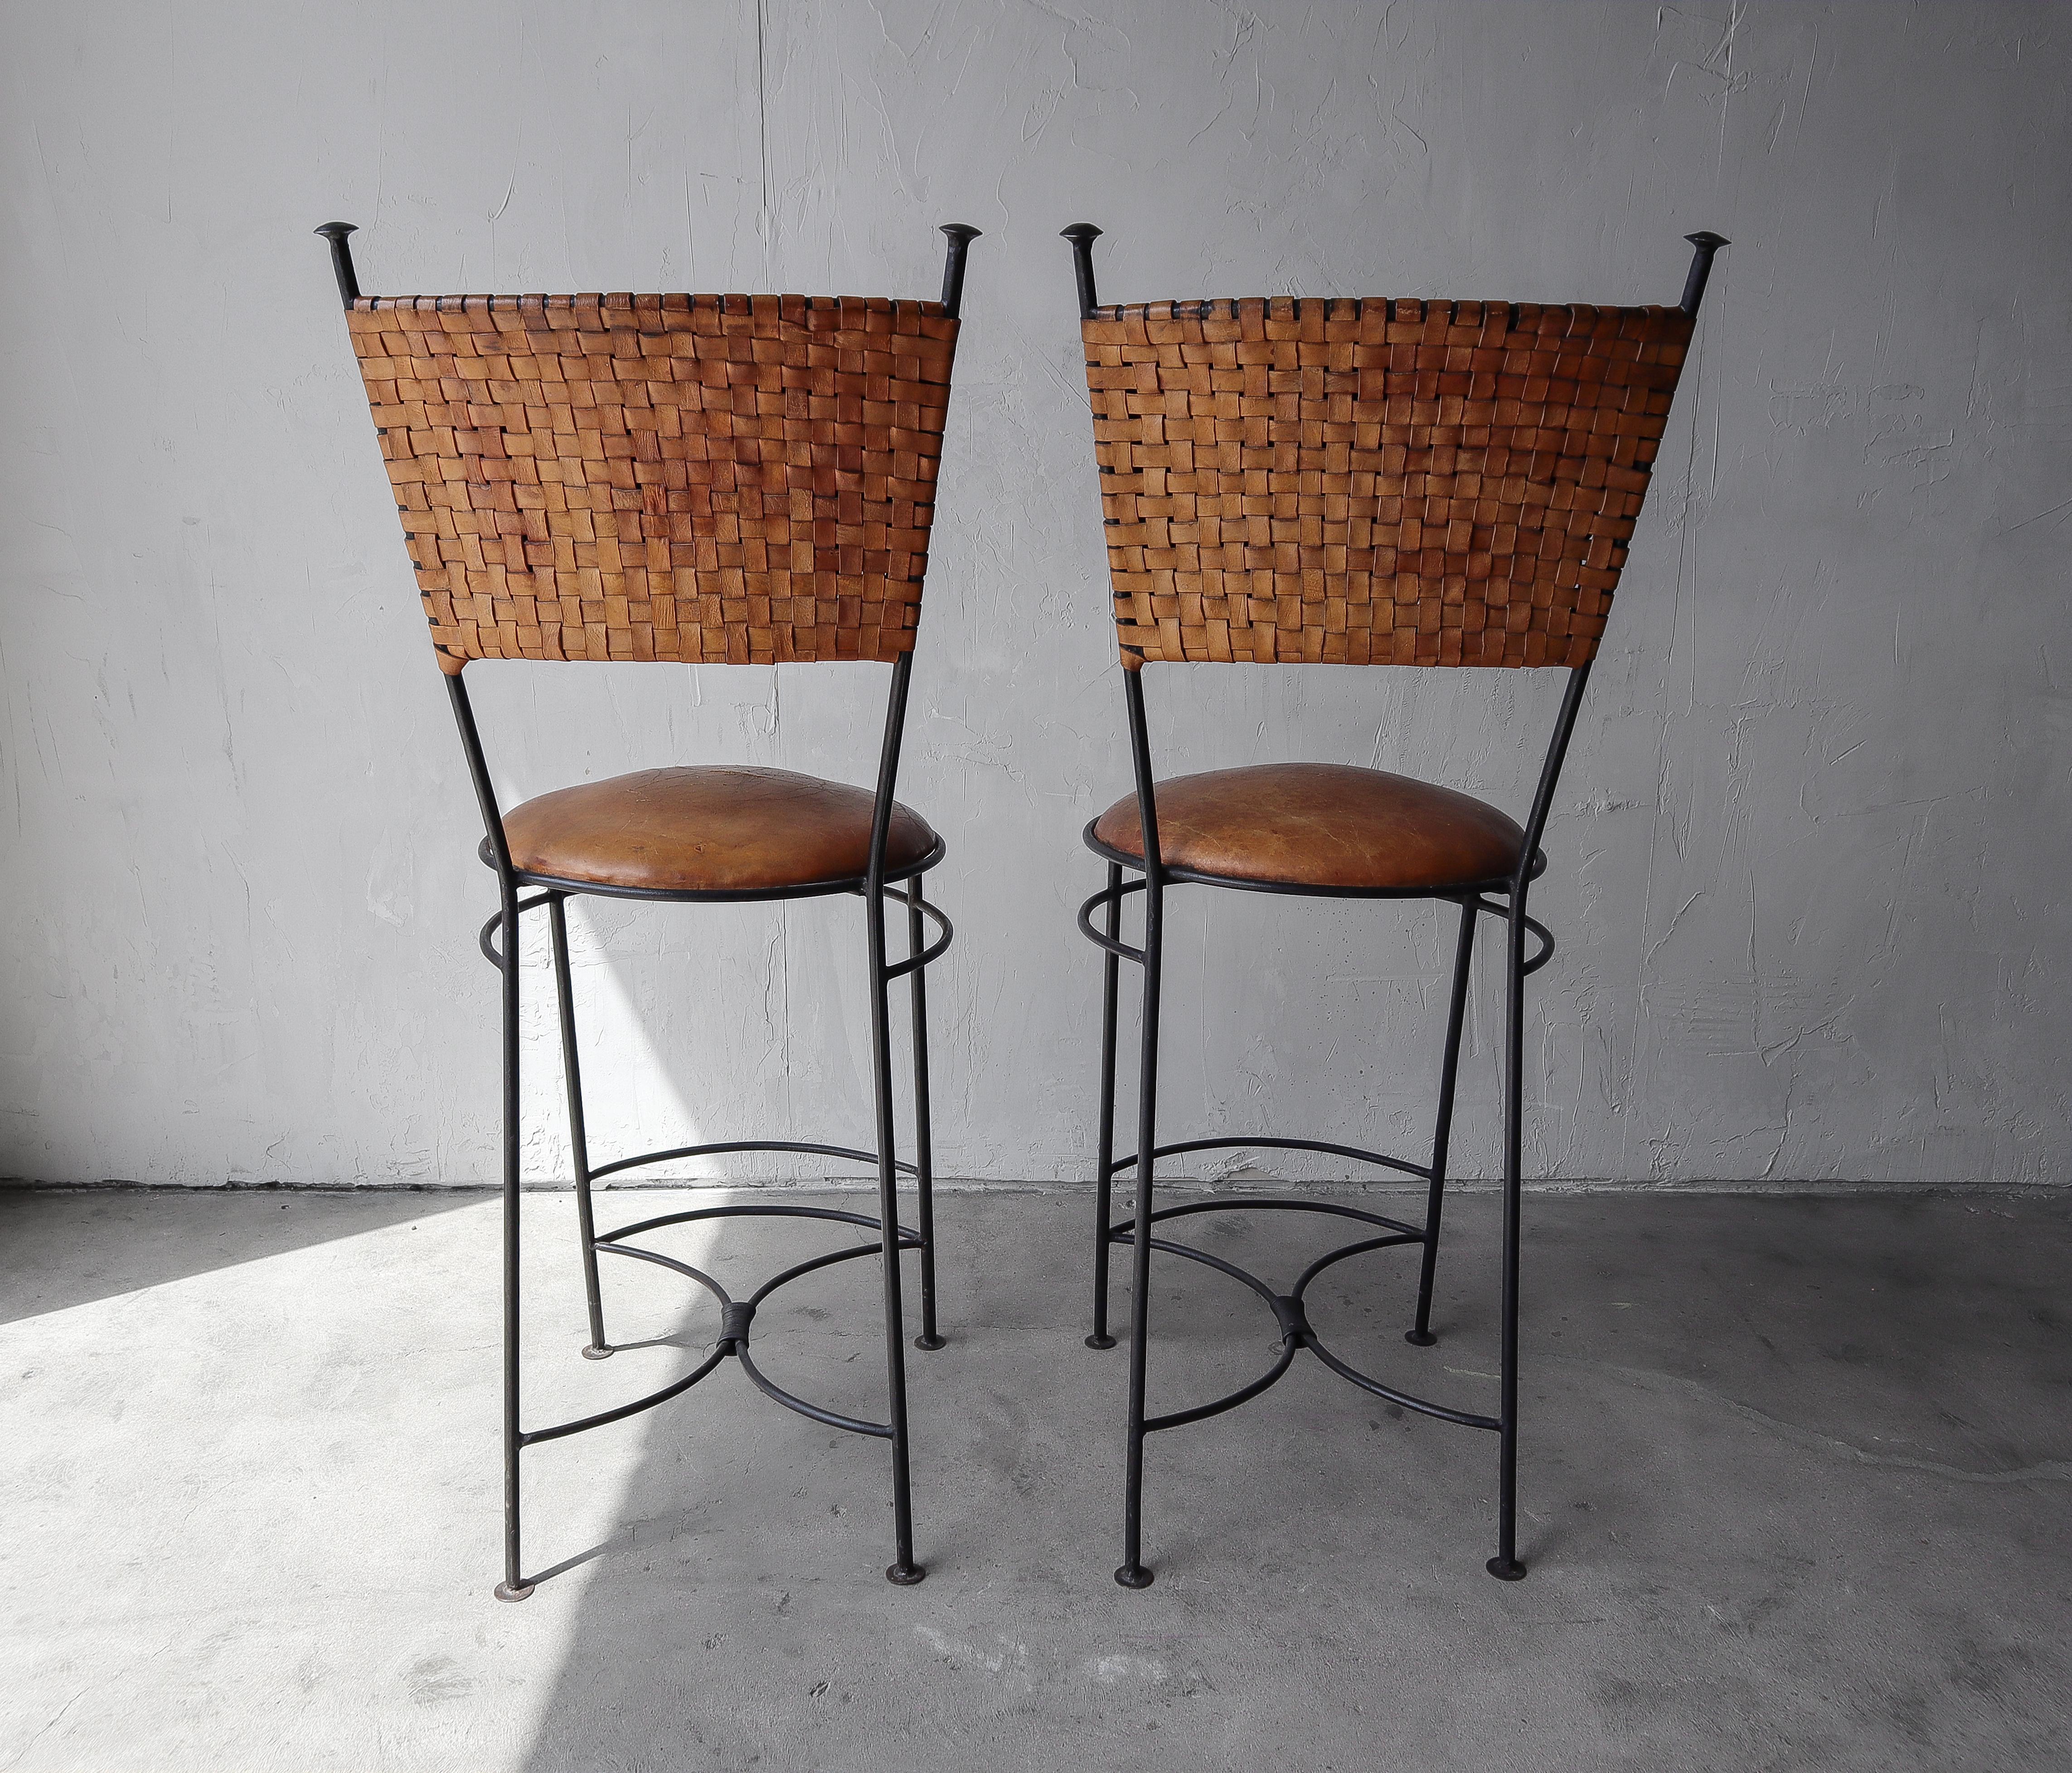 Oversized Vintage Woven Leather and Iron Bar Stools - A Pair In Good Condition For Sale In Las Vegas, NV